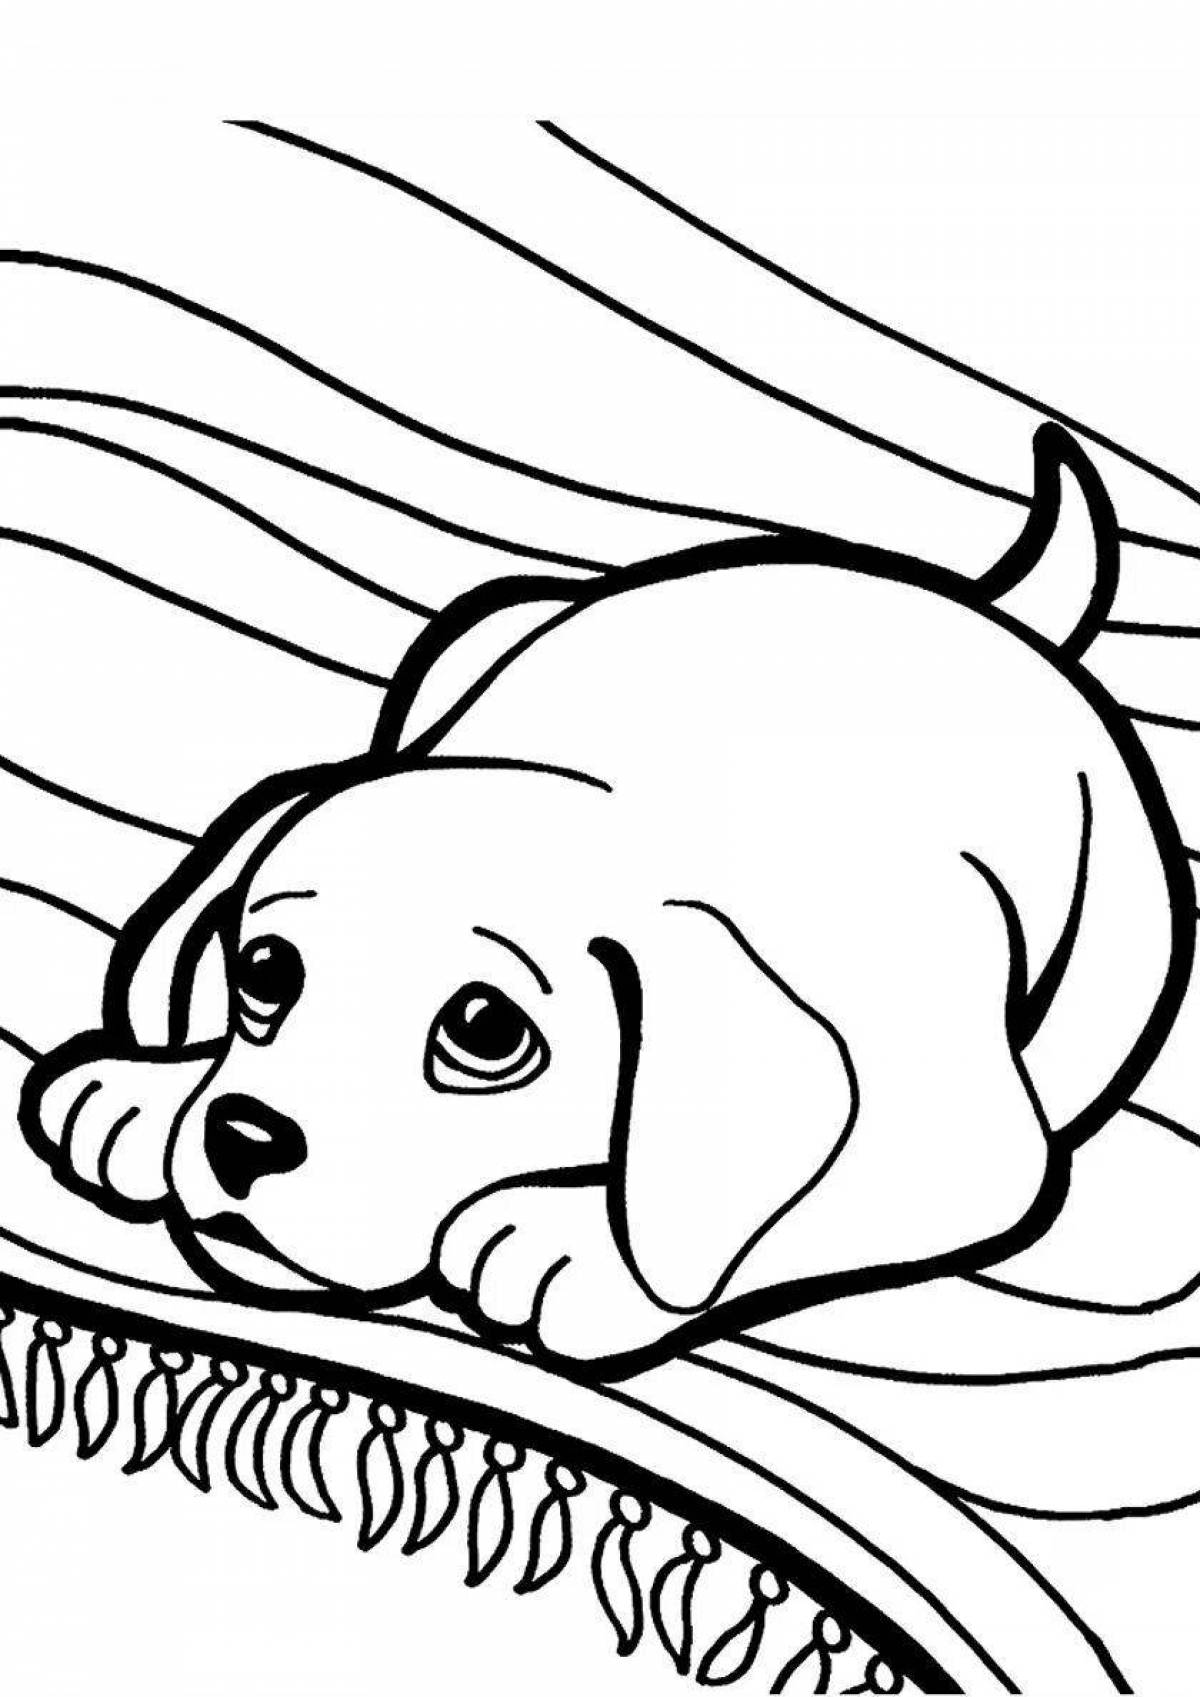 Showy dog ​​coloring book for kids